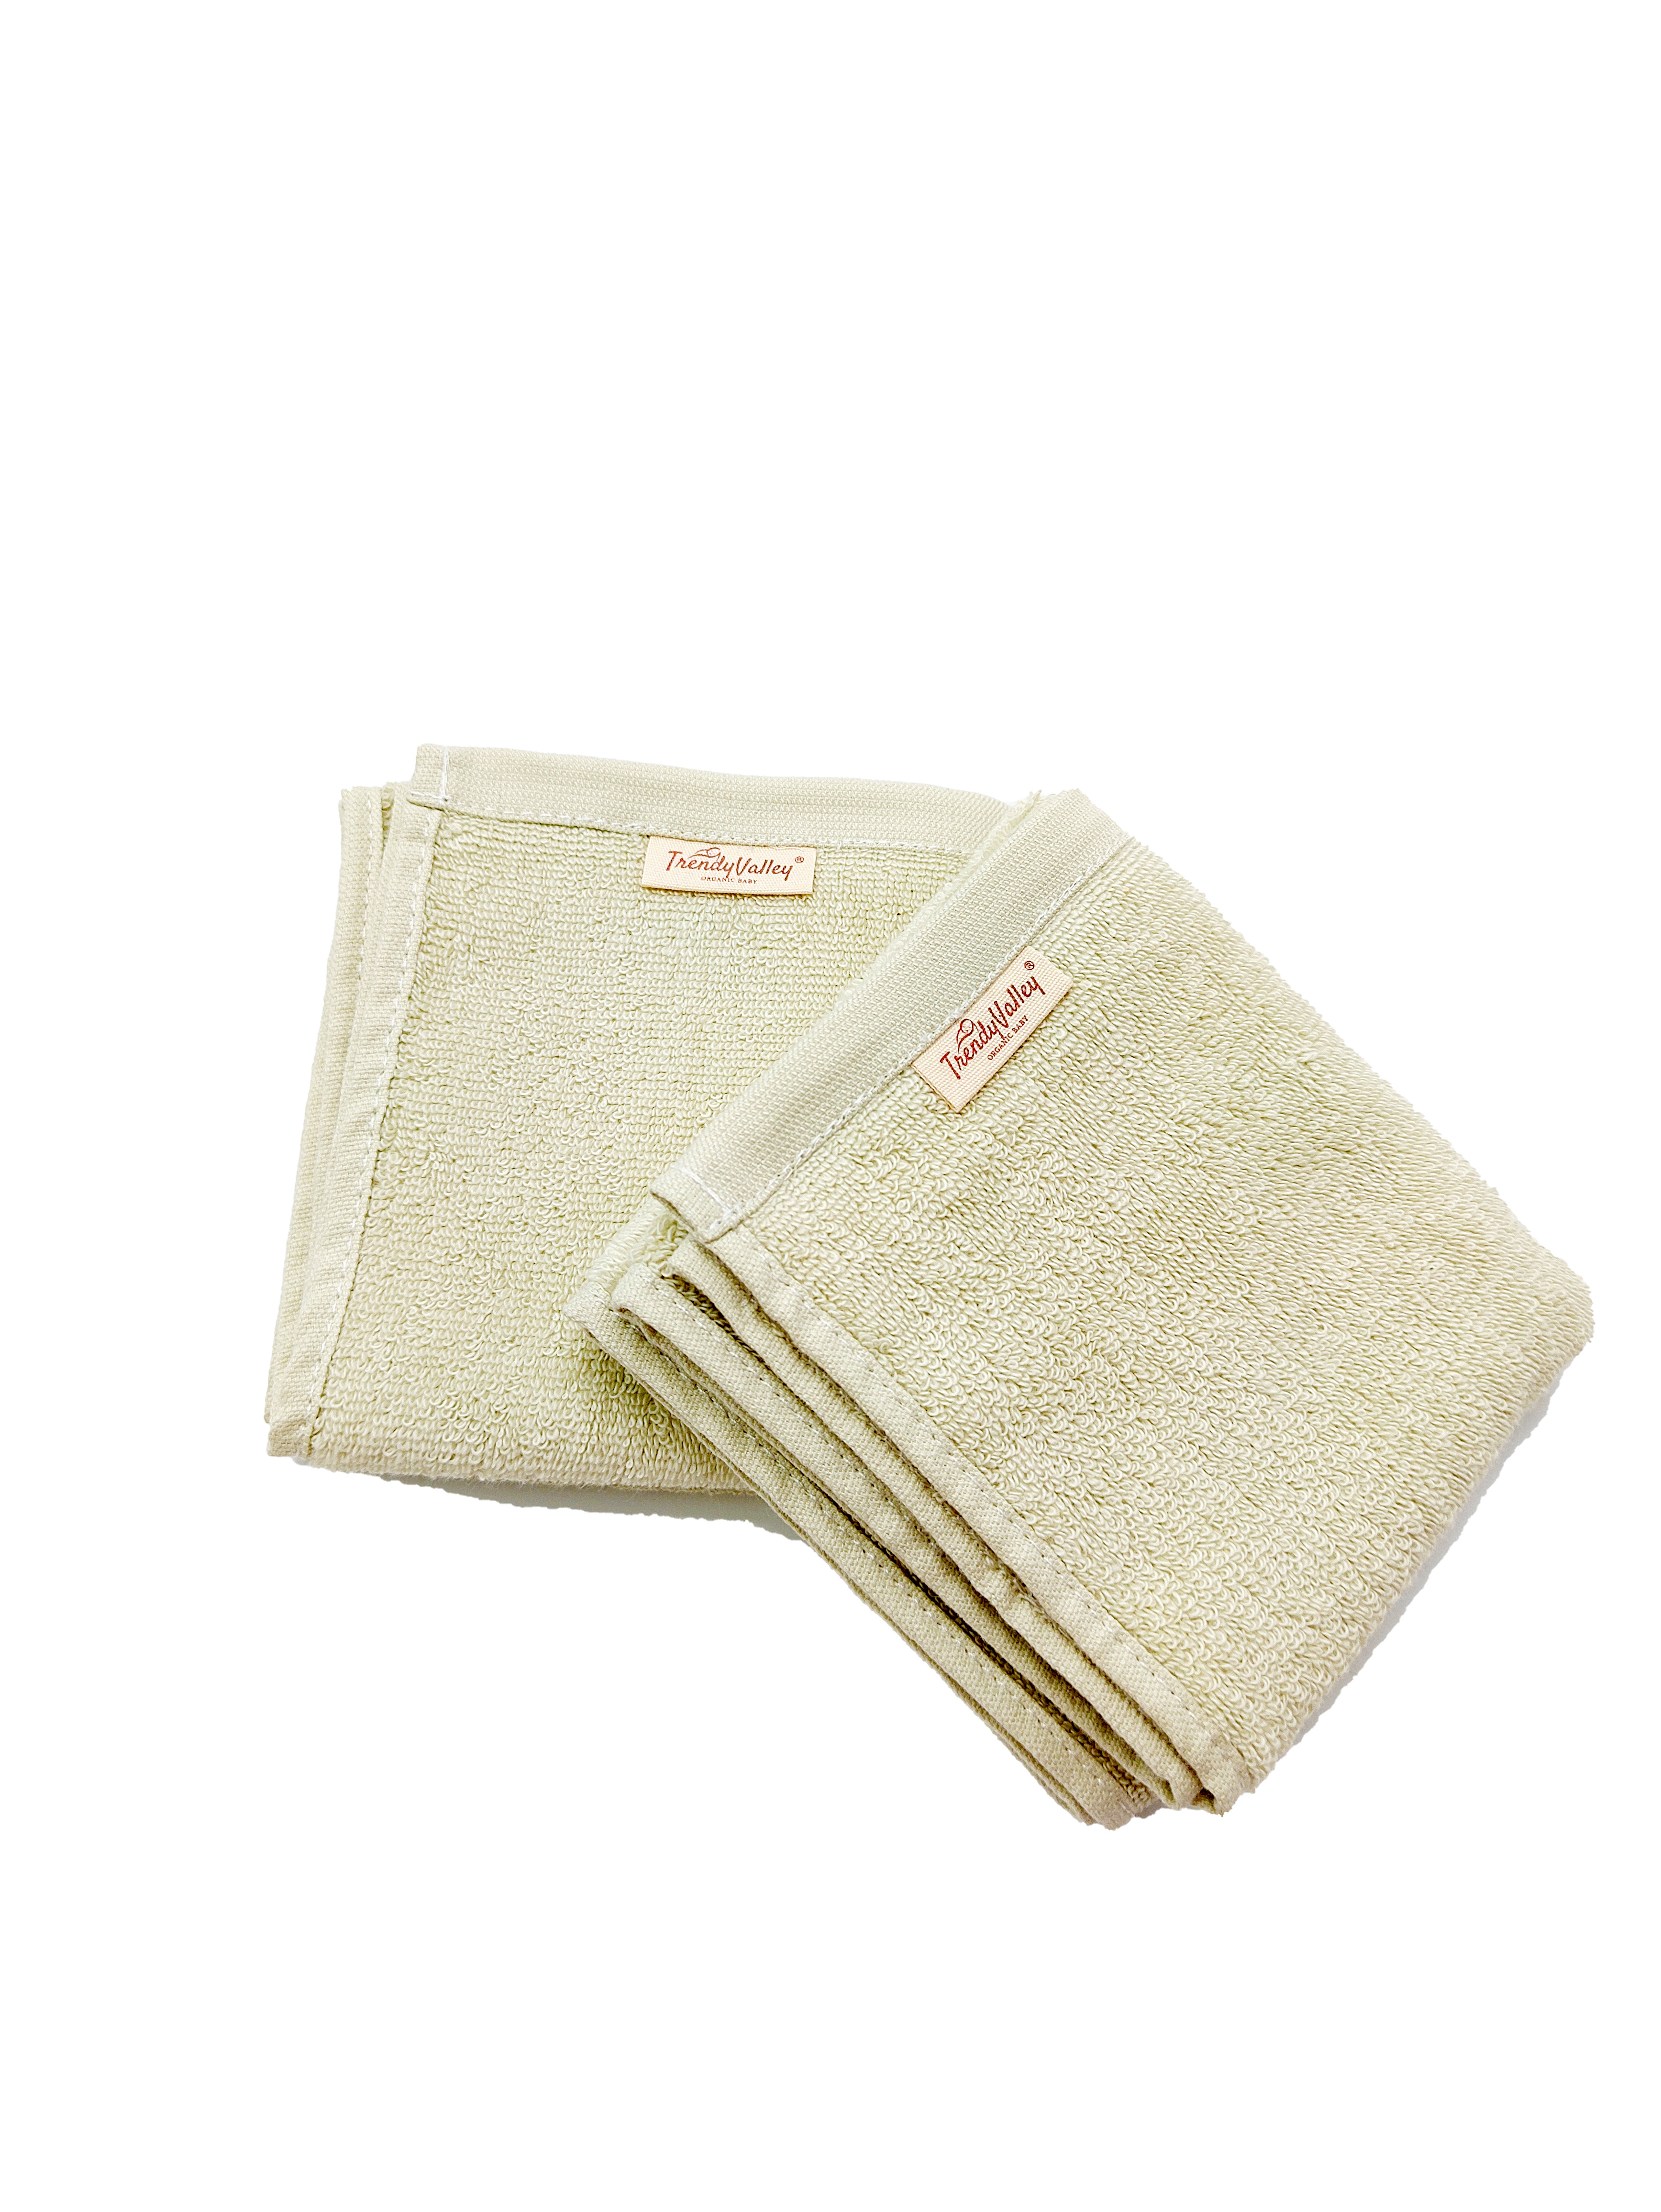 Trendyvalley Organic Cotton Small Towel